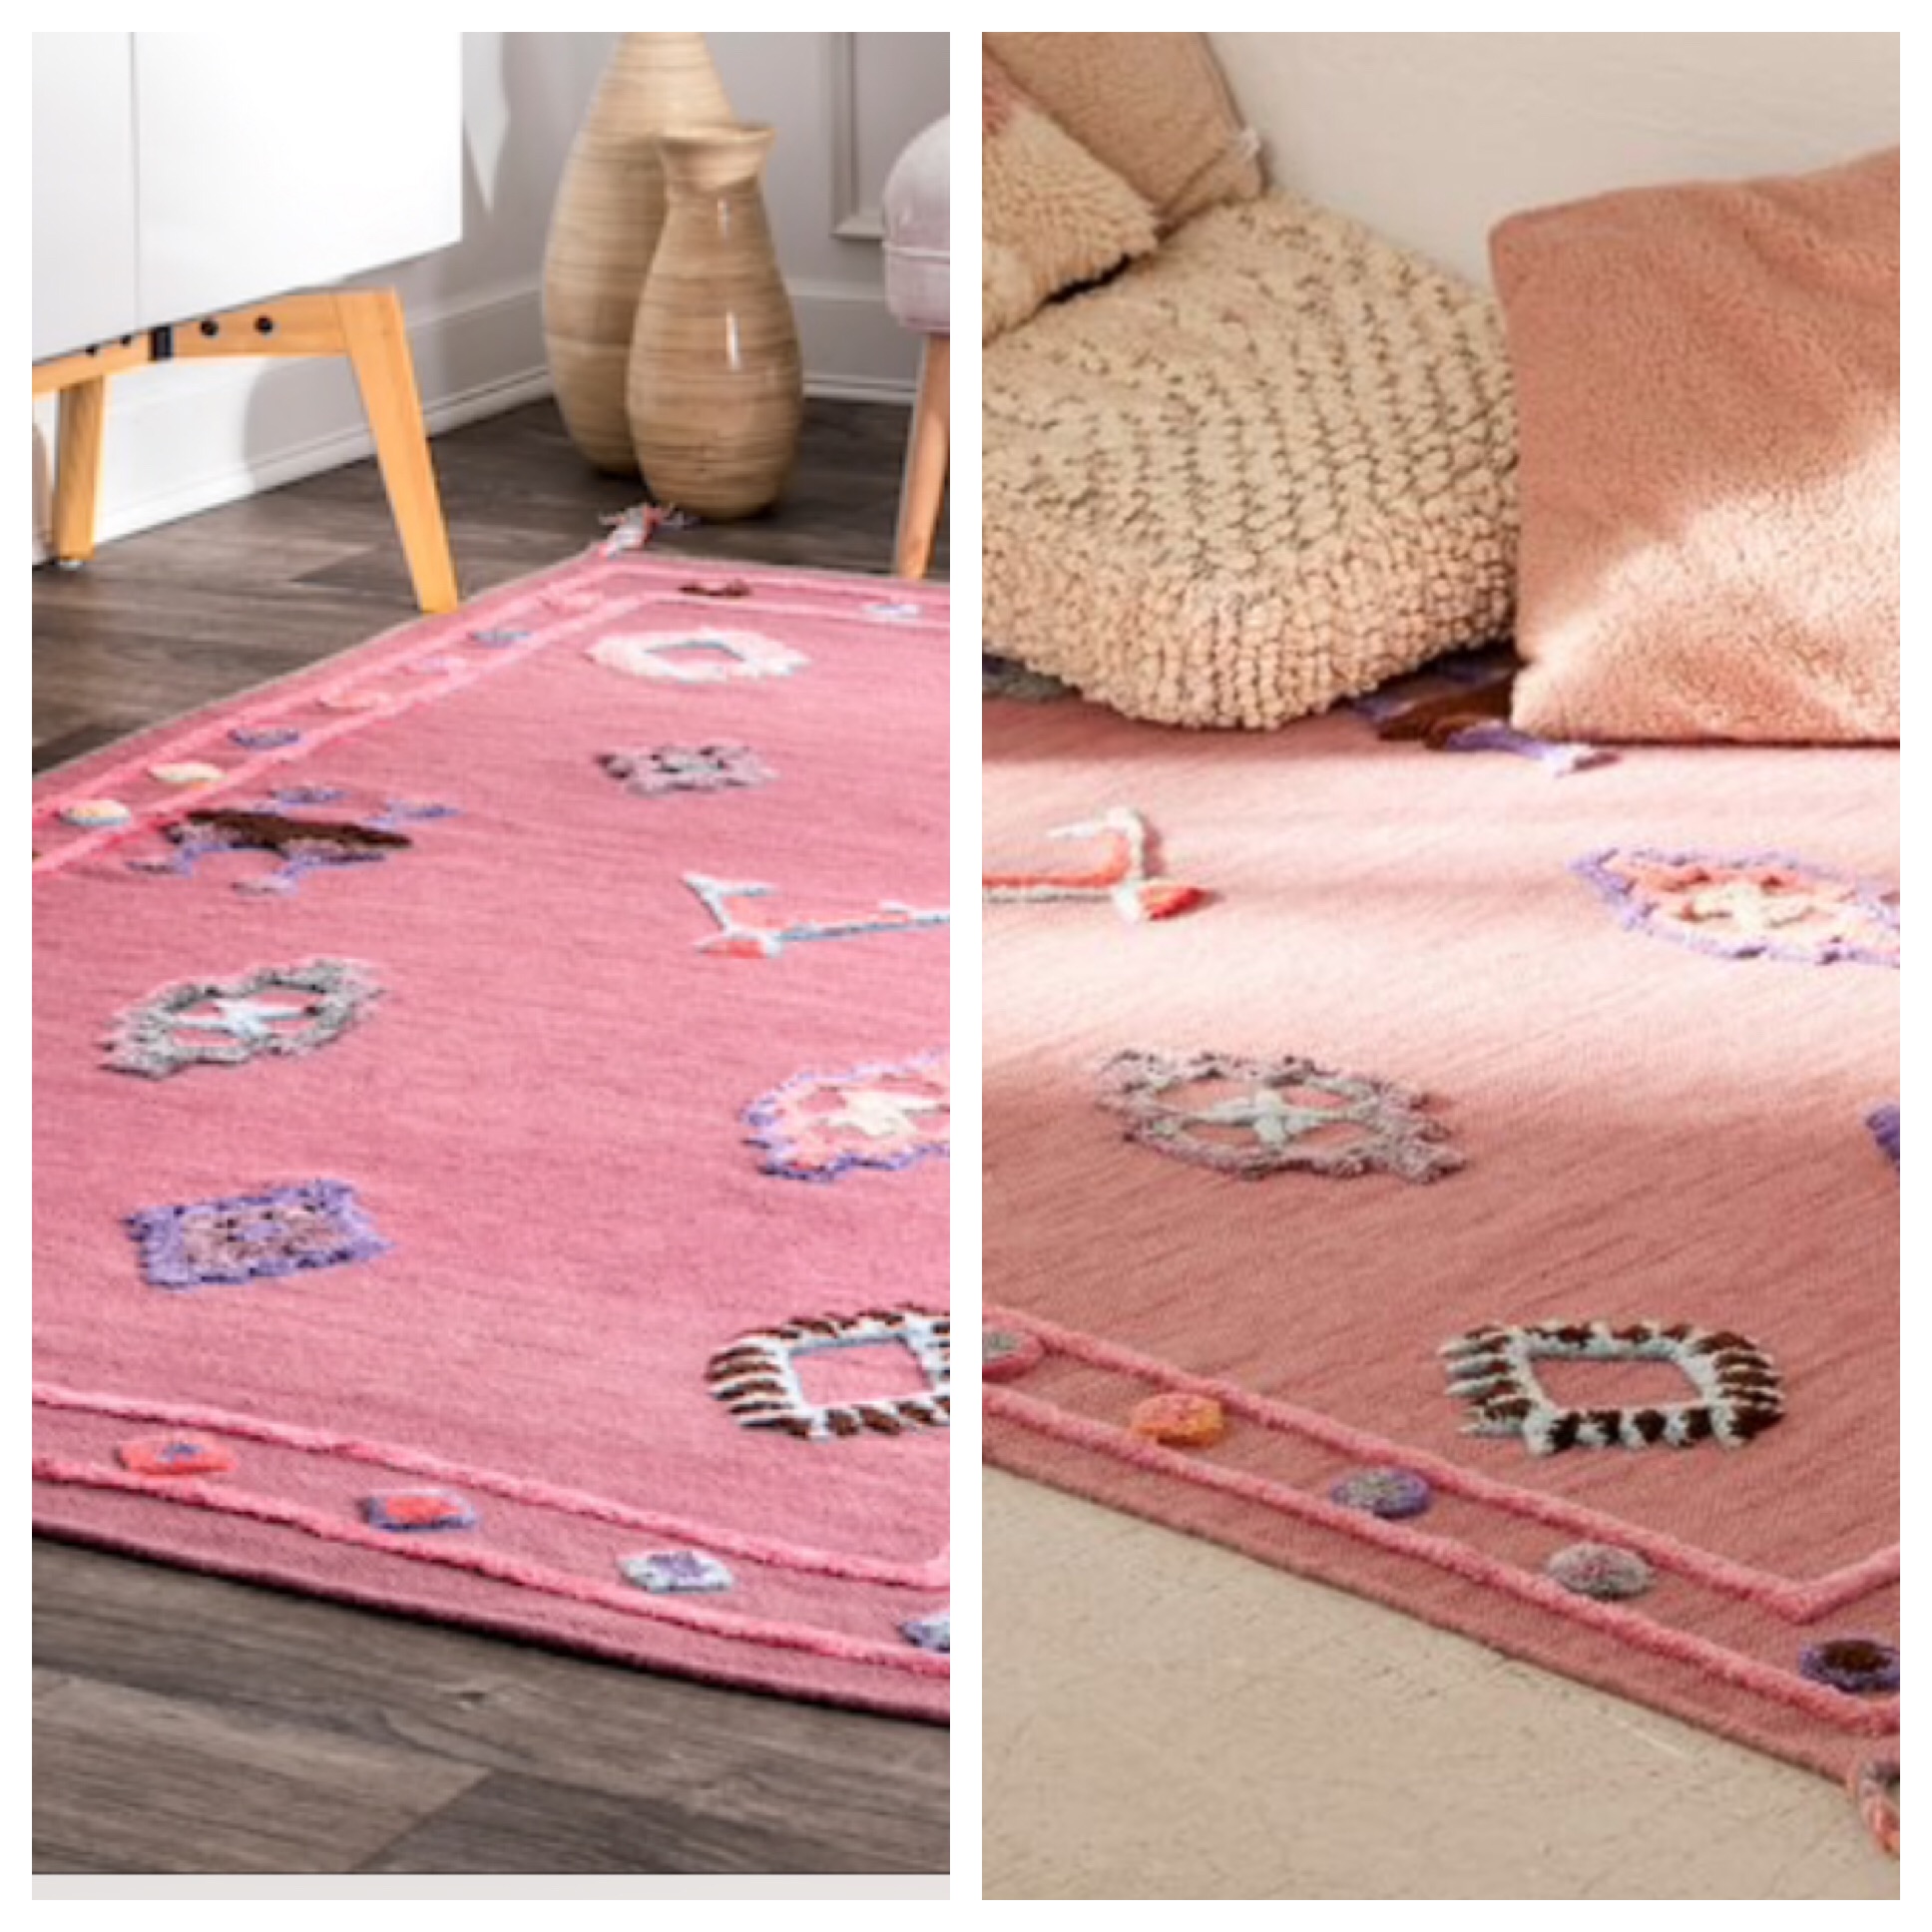 Urban Outfitter Rug Dupes Poppie Lady, Urban Outfitter Rugs